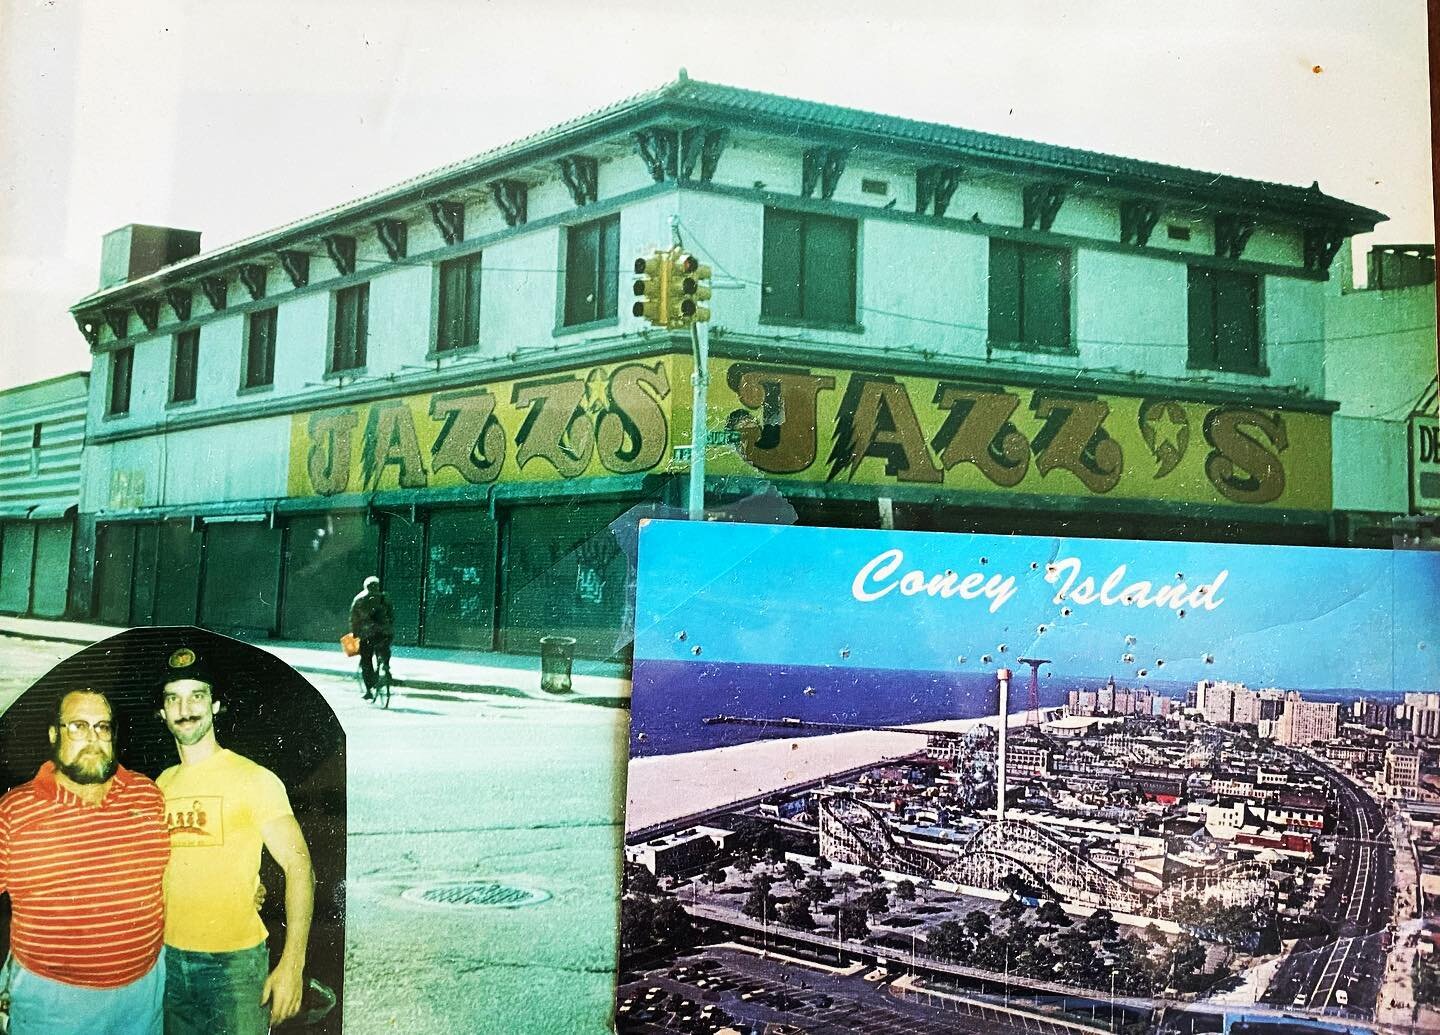 Check out this blast from the past! This framed collage harkens back to the 1980&rsquo;s, when our landmarked building at 1208 Surf Ave was the legendary Jazz&rsquo;s Arcade! Love the photo of owner Jazz Austin, and the vintage Coney Island postcard 